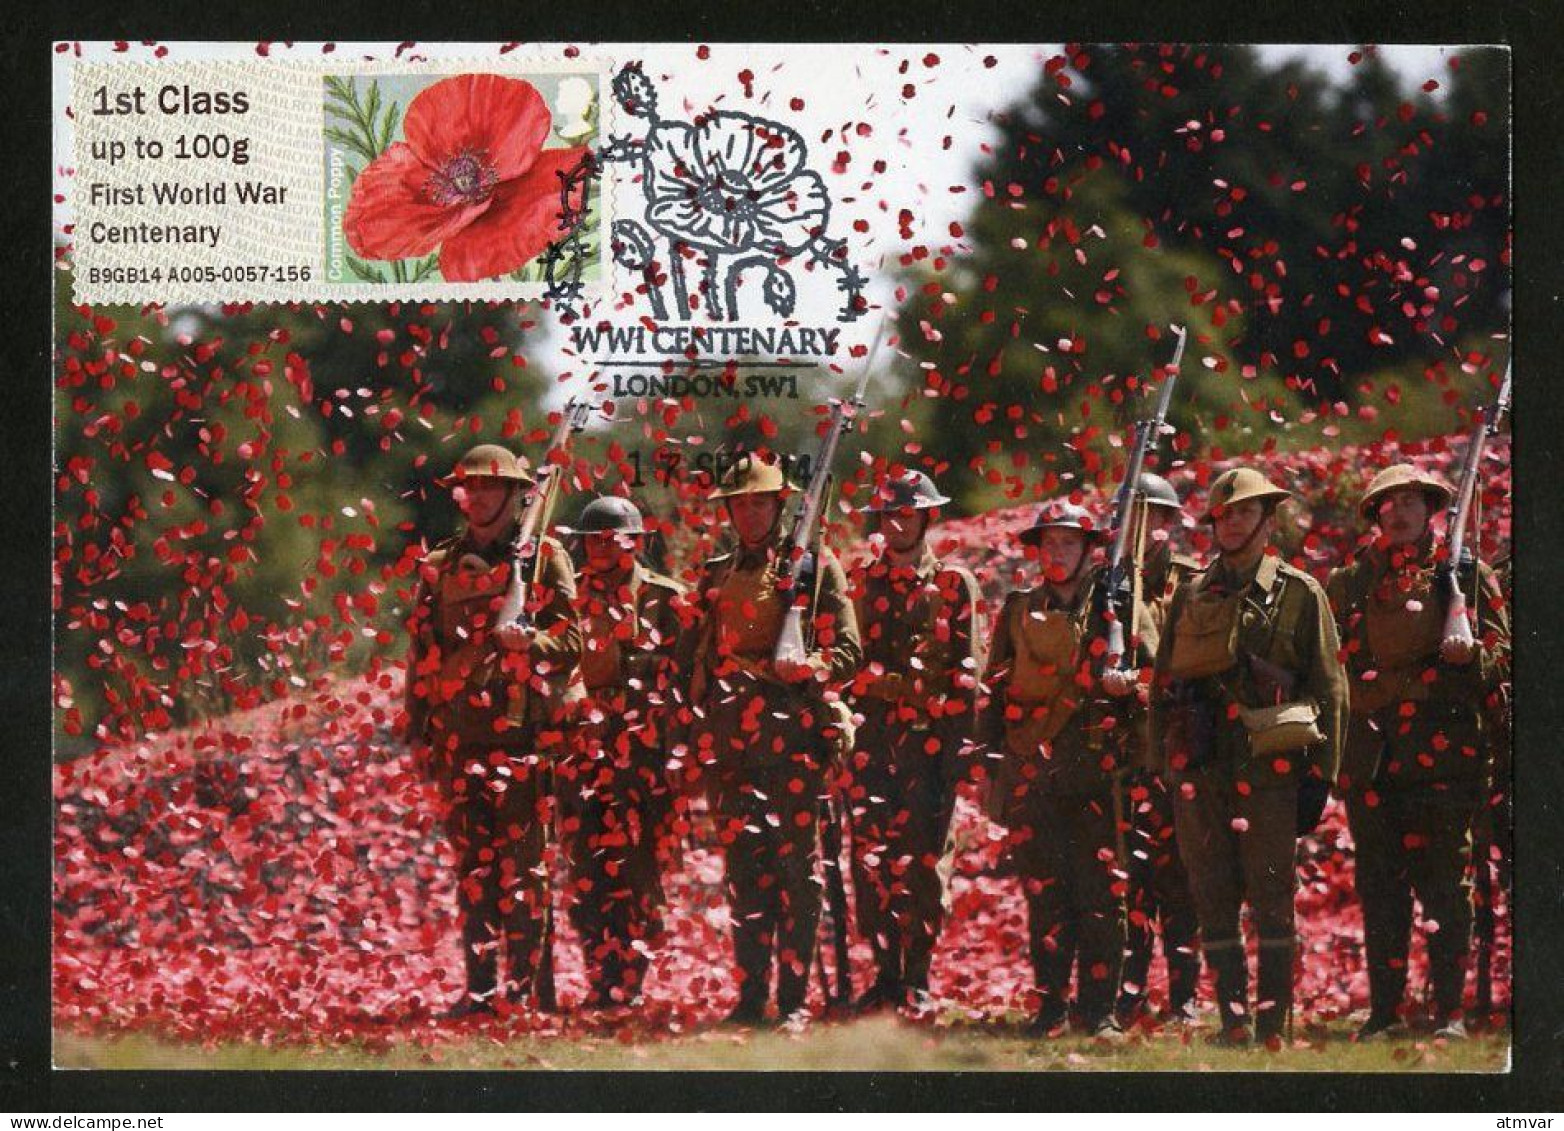 UK (2014) Carte Maximum Card ATM Post&Go - First World War Centenary, Tank Museum - Soldiers, Poppy, Coquelicot - Carte Massime